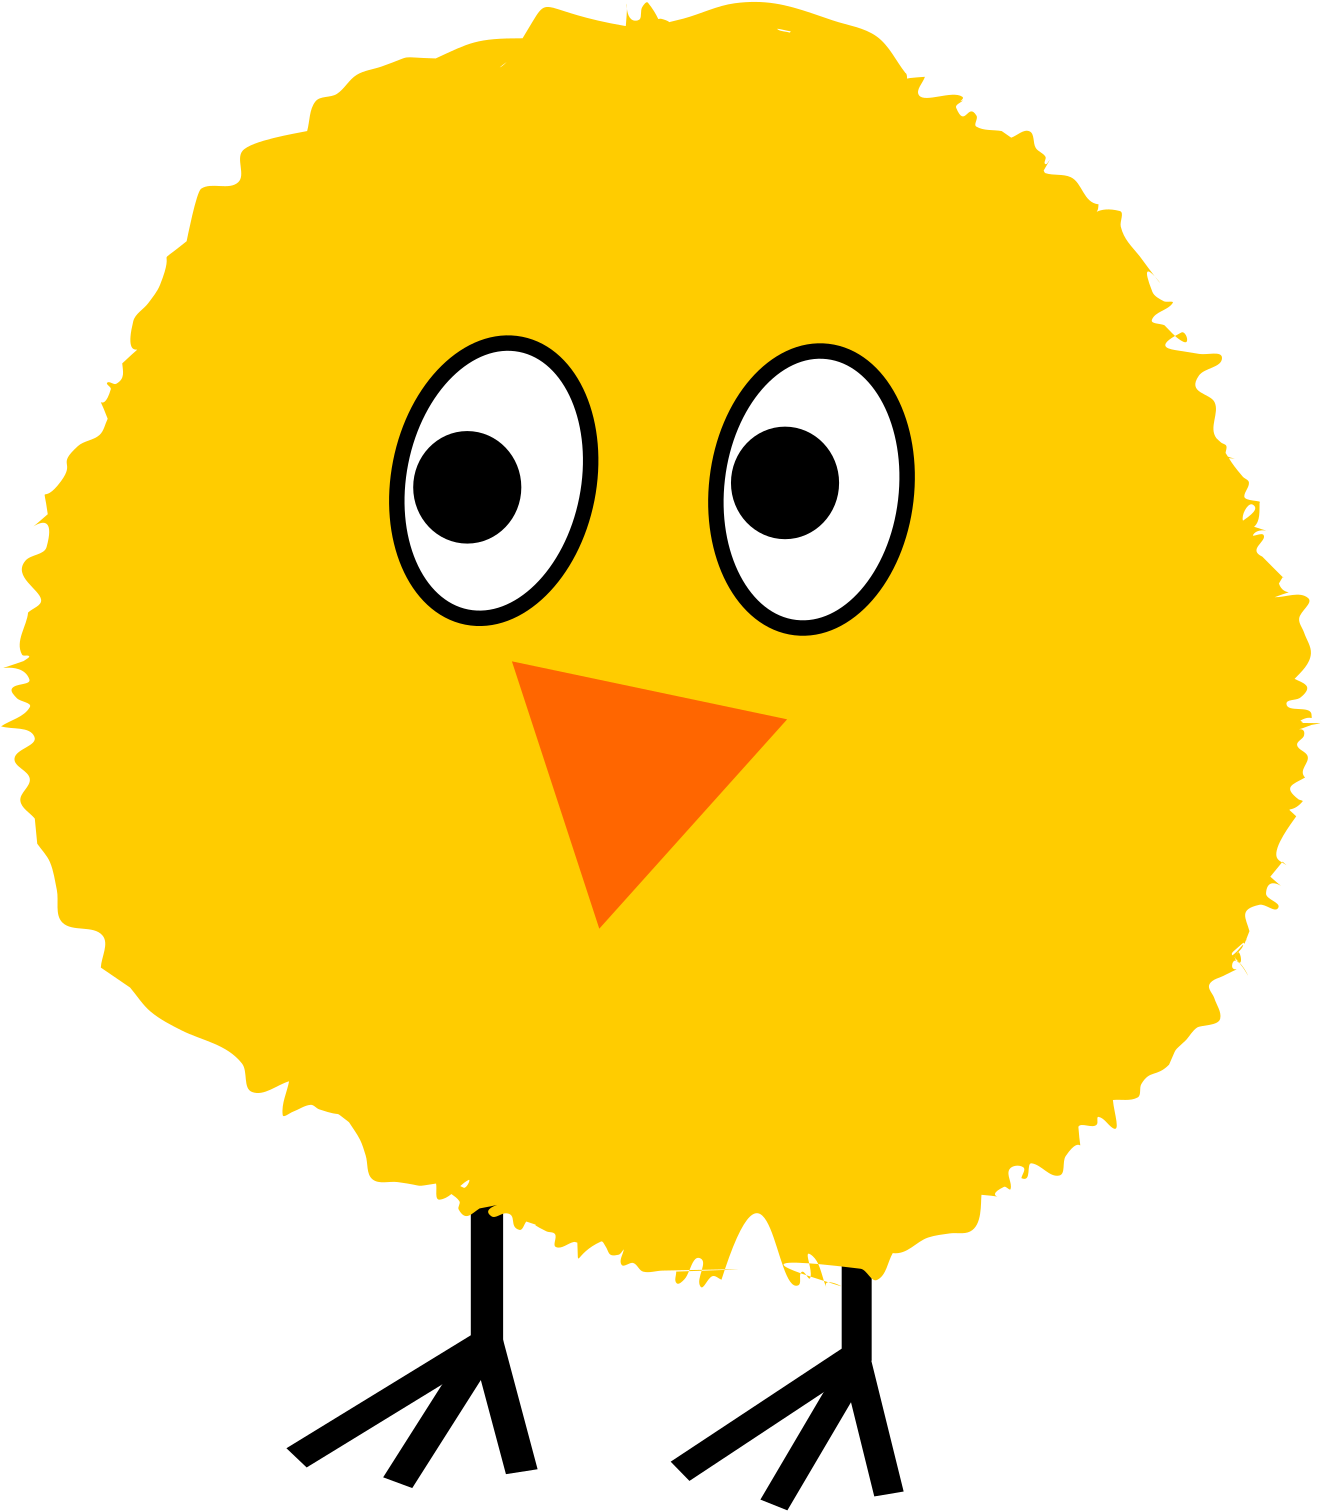 A Yellow Bird With A Black Background